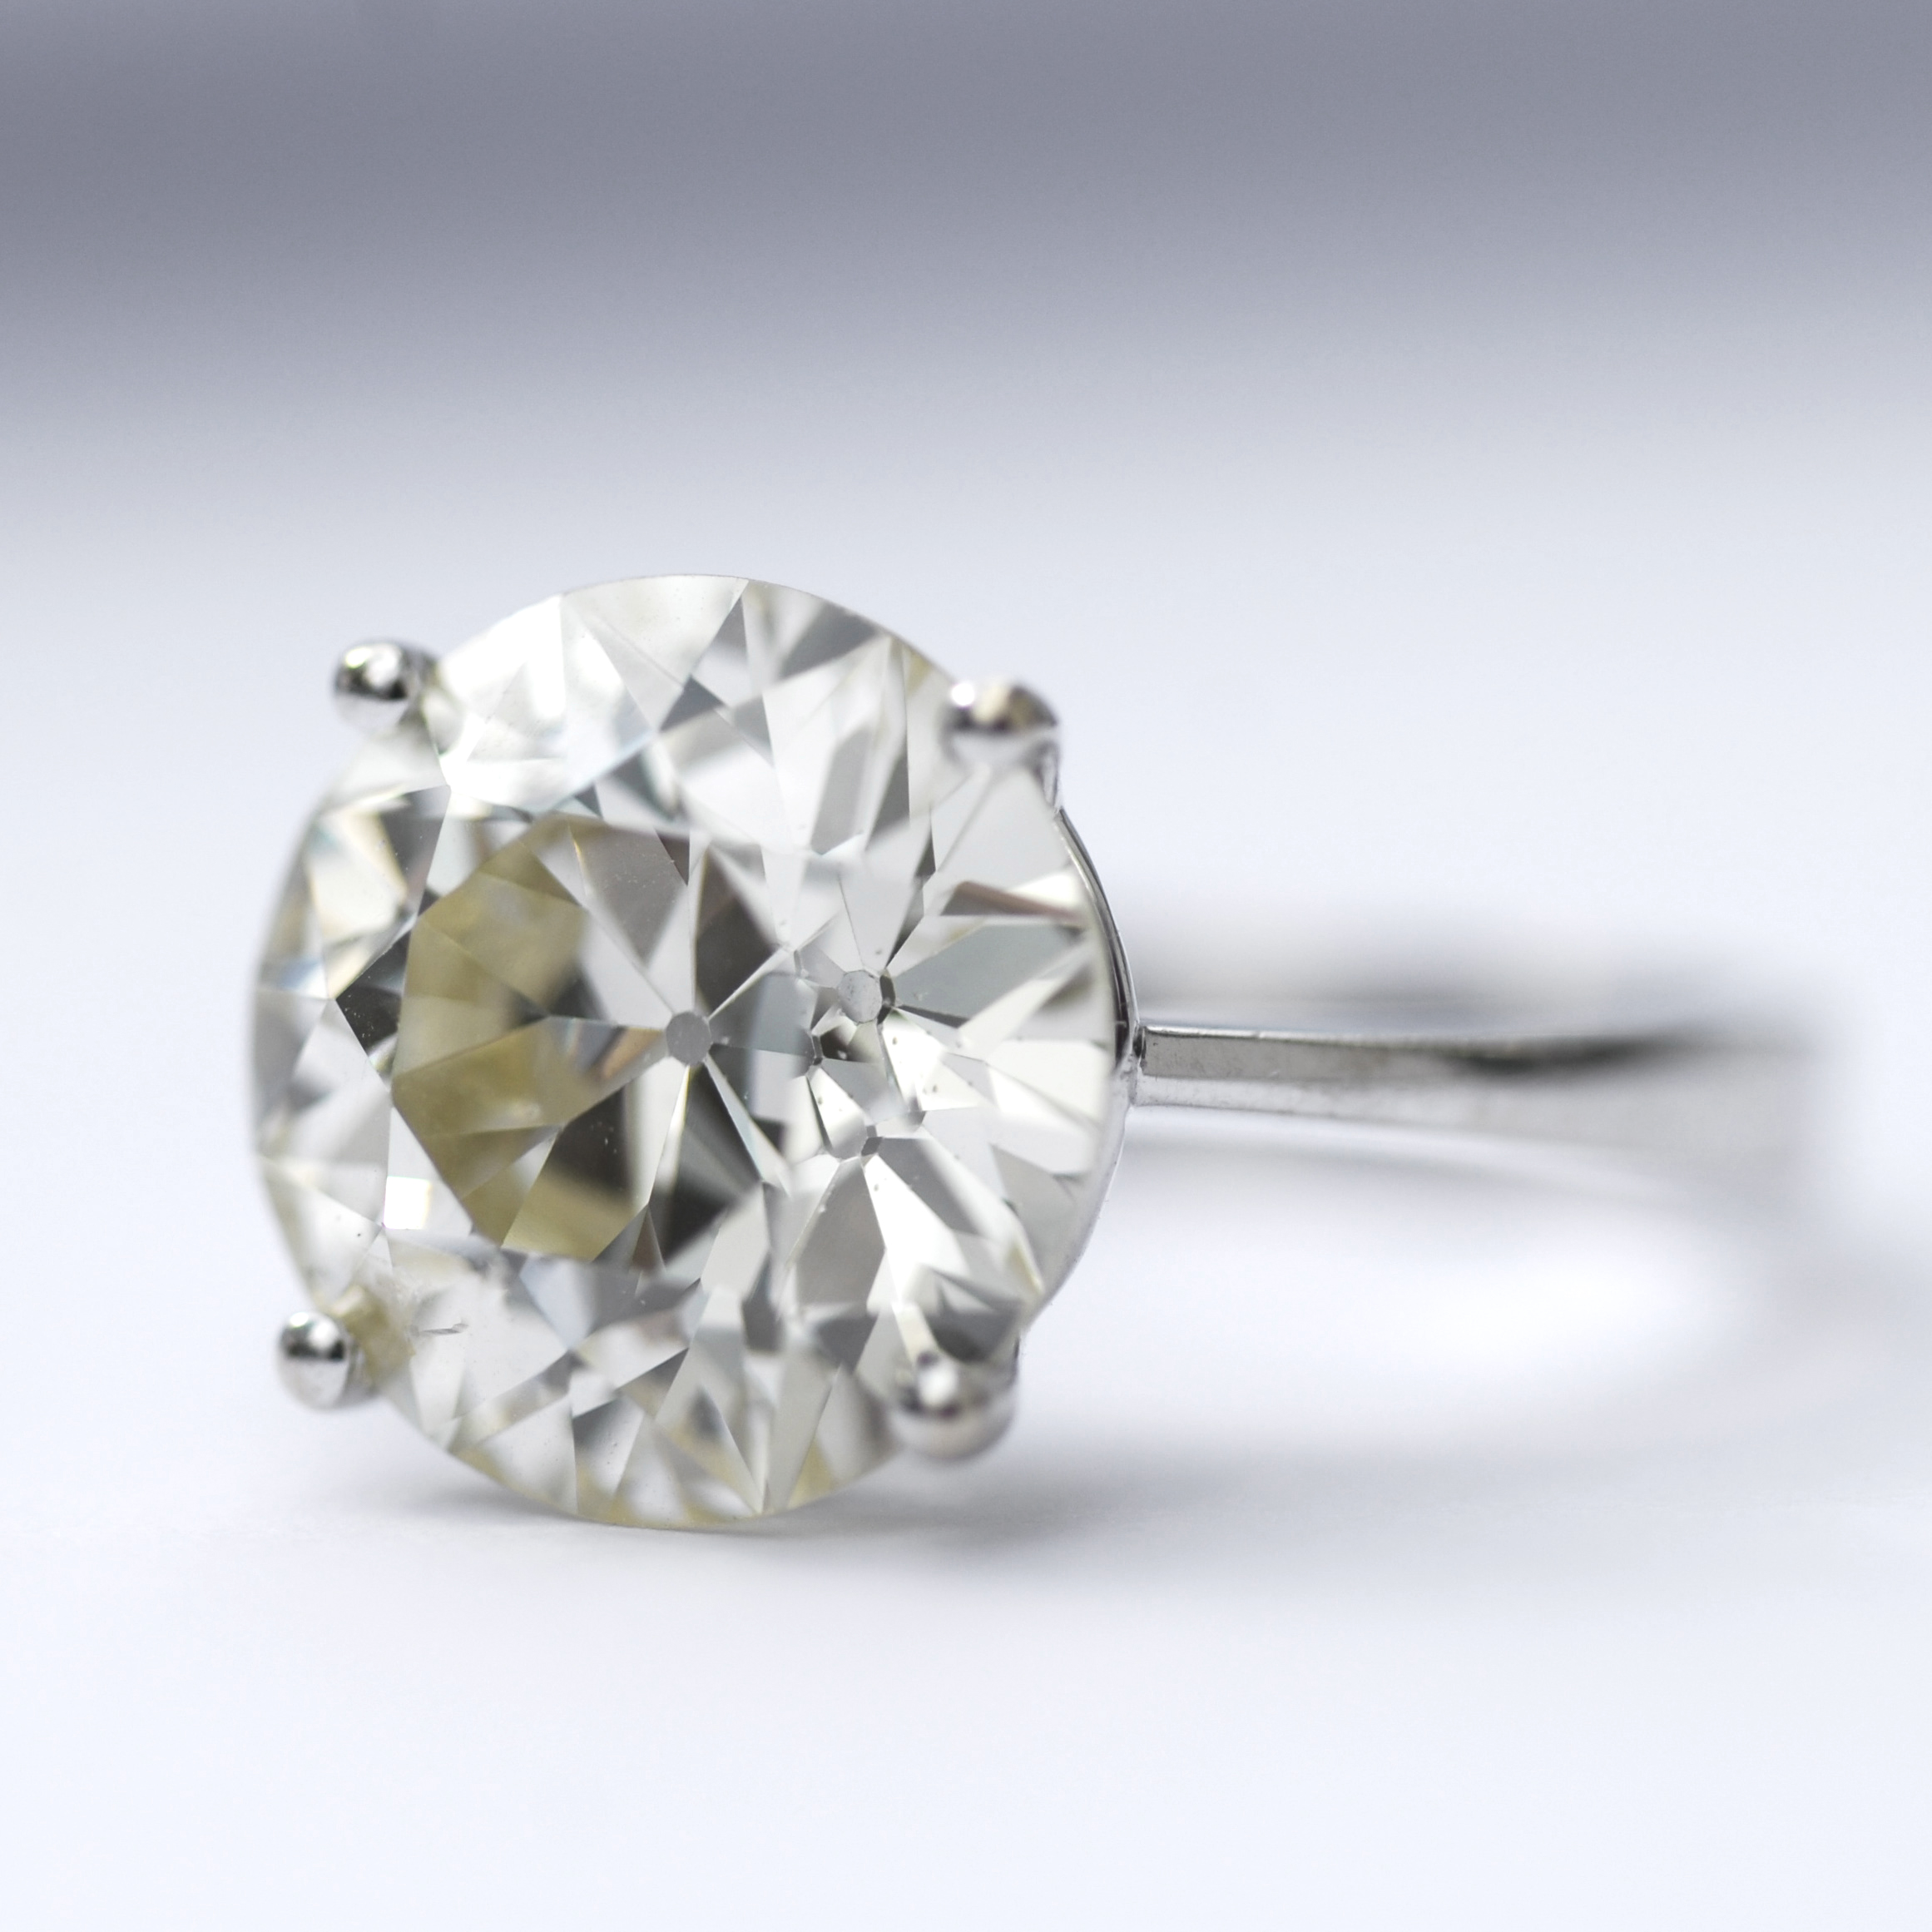 A solitaire ring with a highcarat fancy diamond - image 2